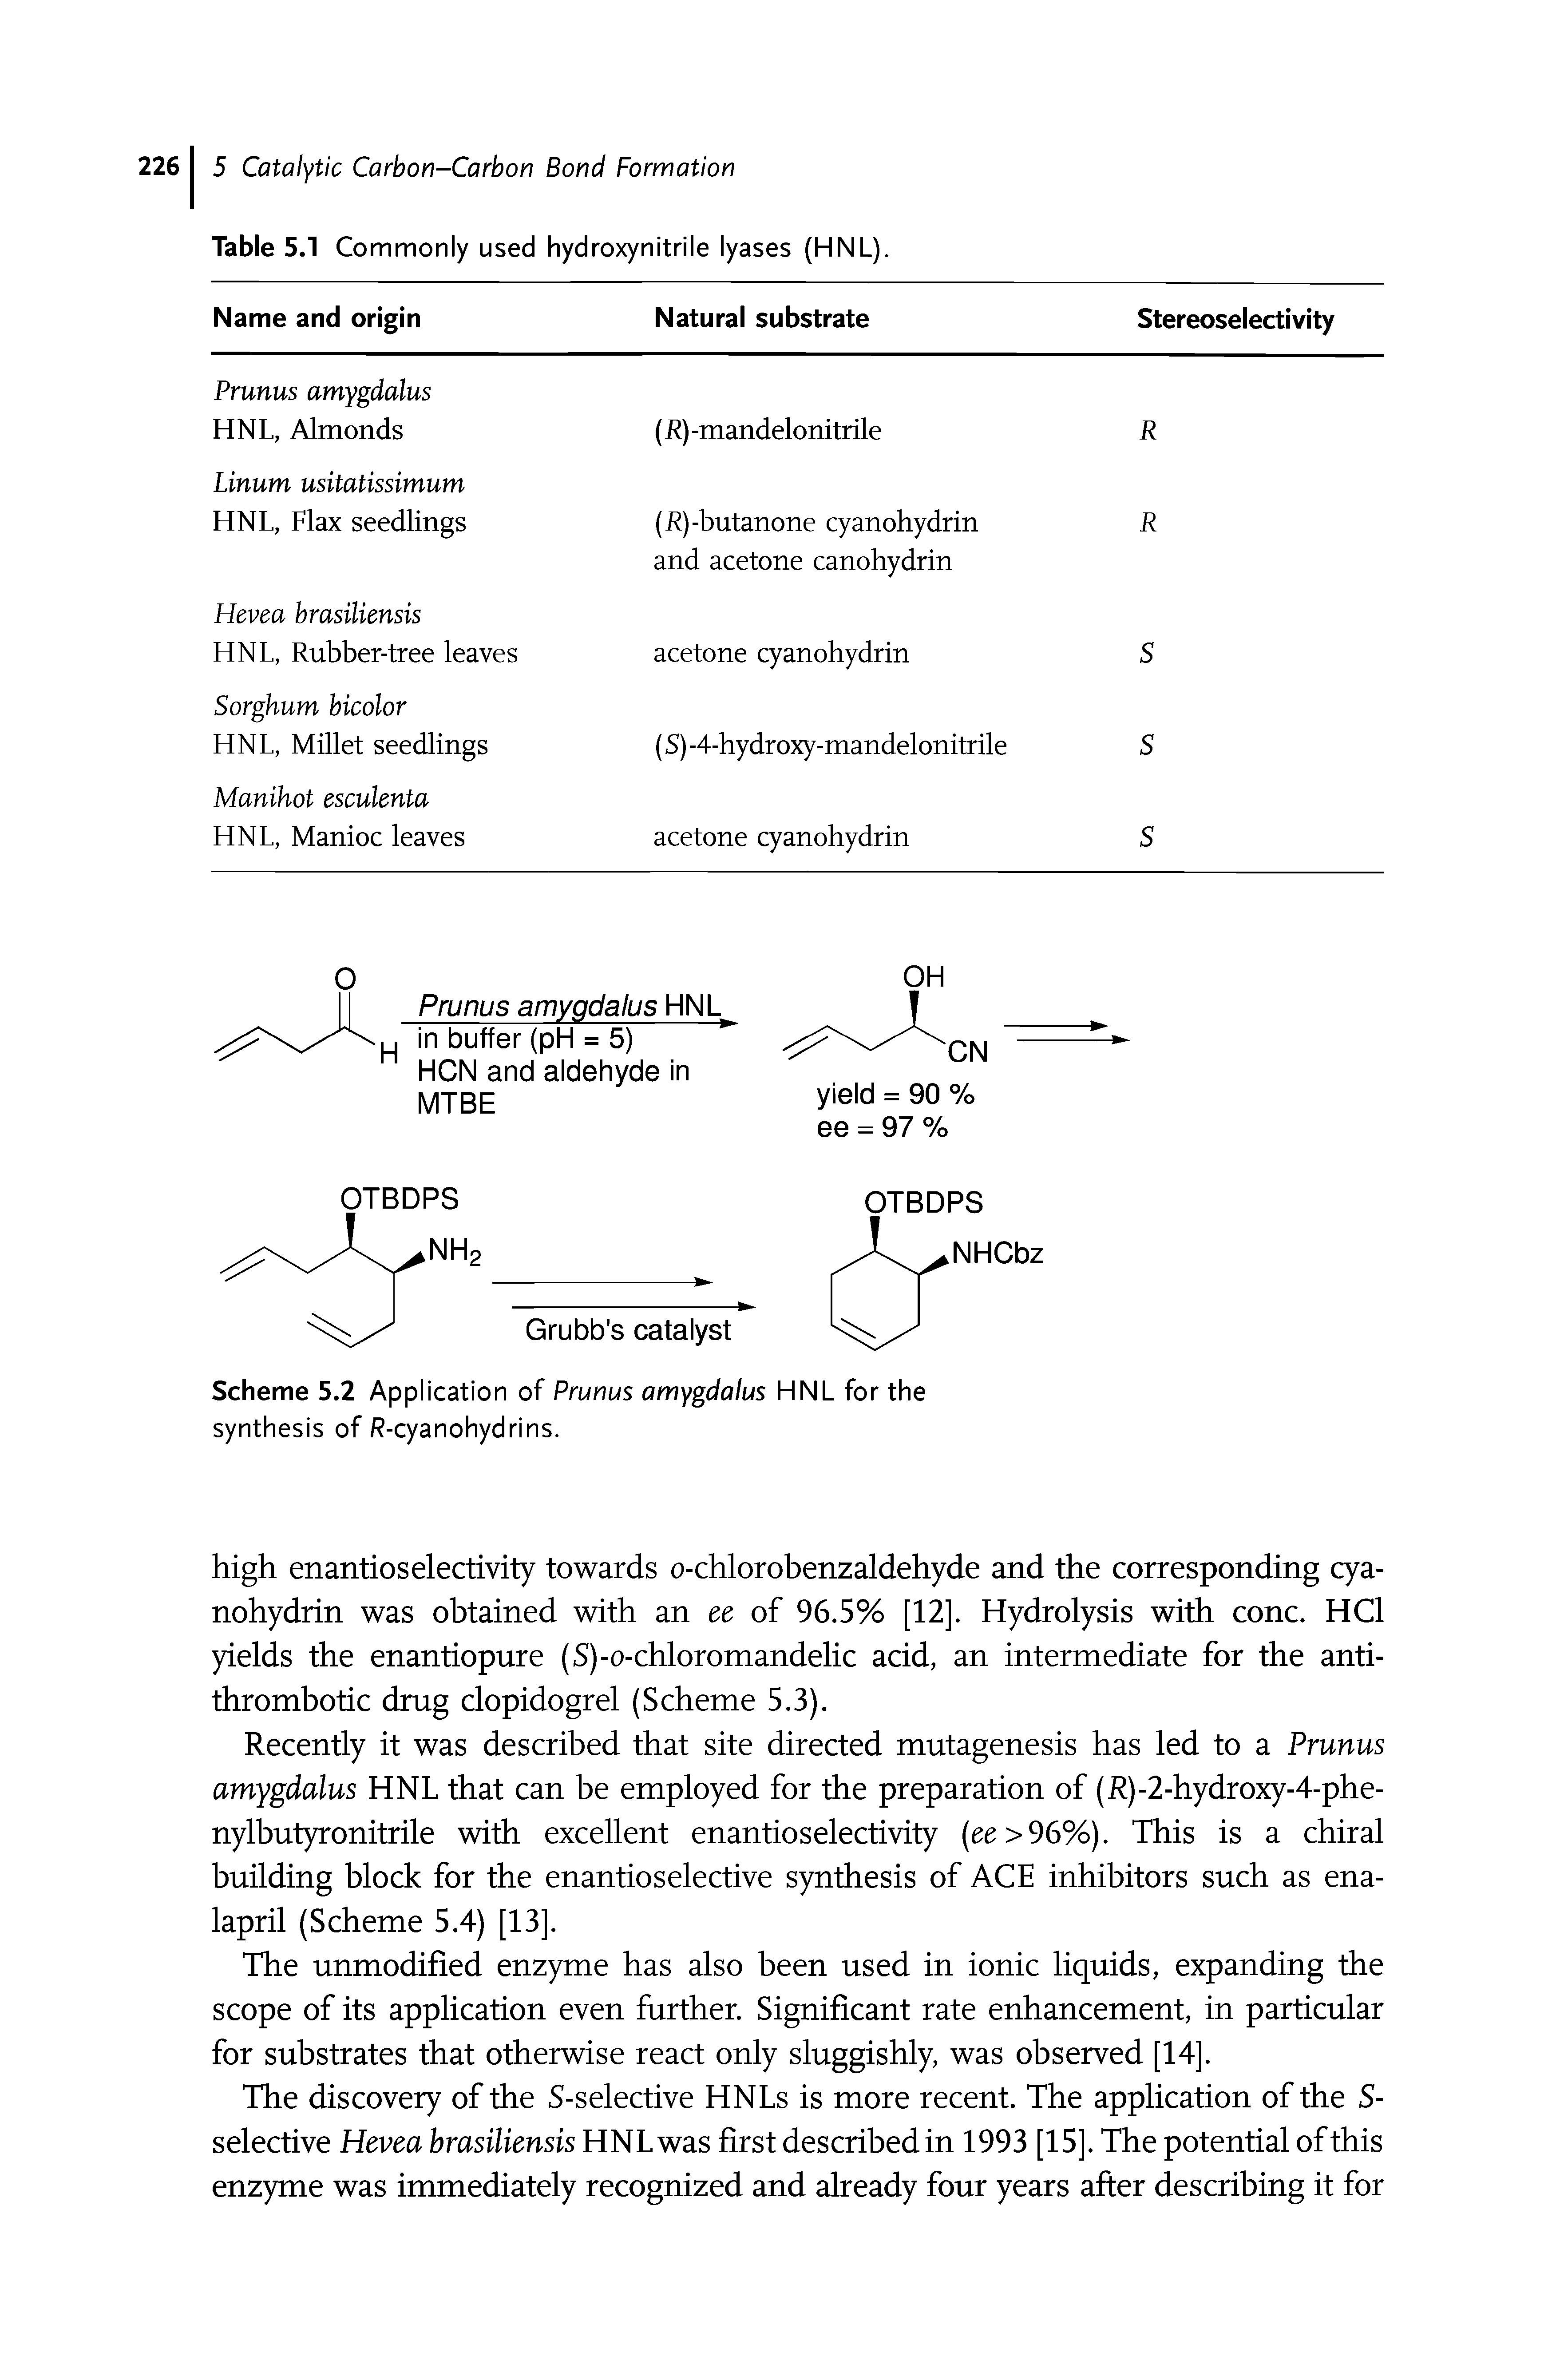 Scheme 5.2 Application of Prunus amygdalus HNL for the synthesis of R-cyanohydrins.